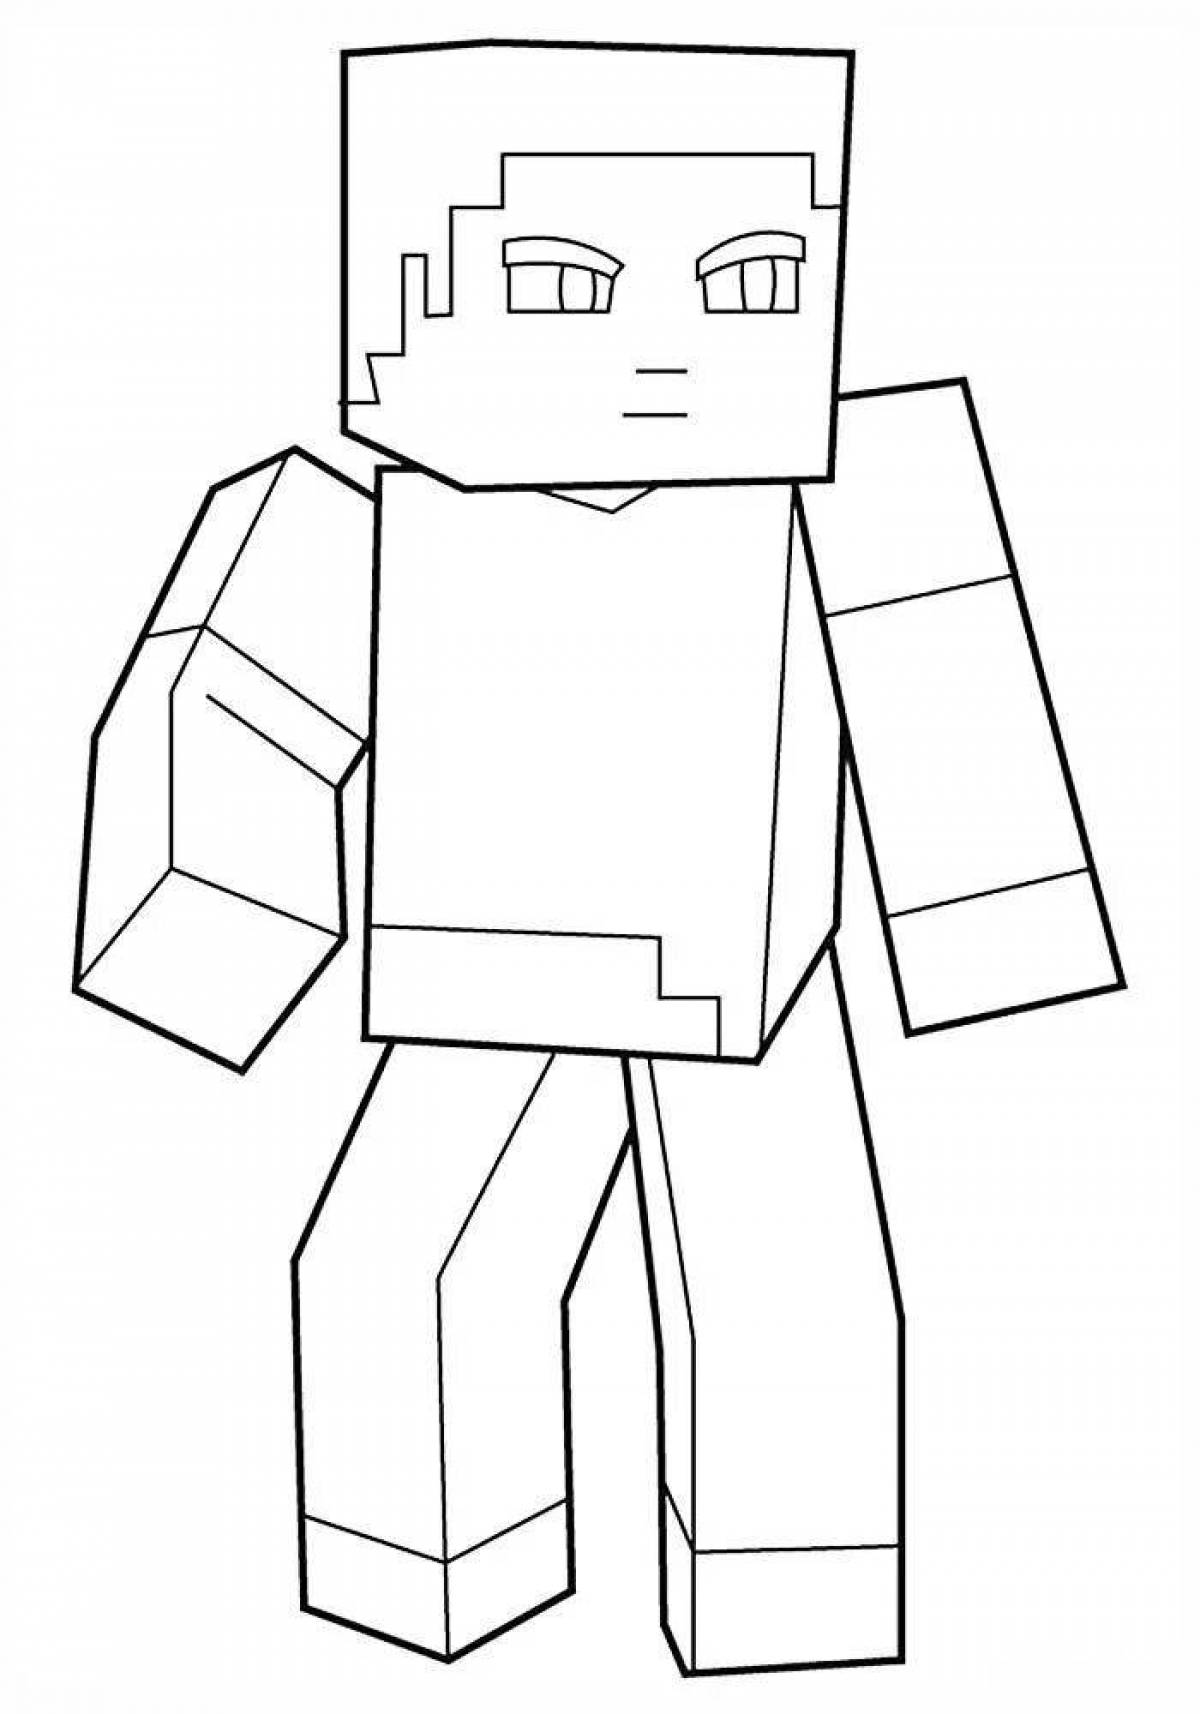 Amusing minecraft character coloring page